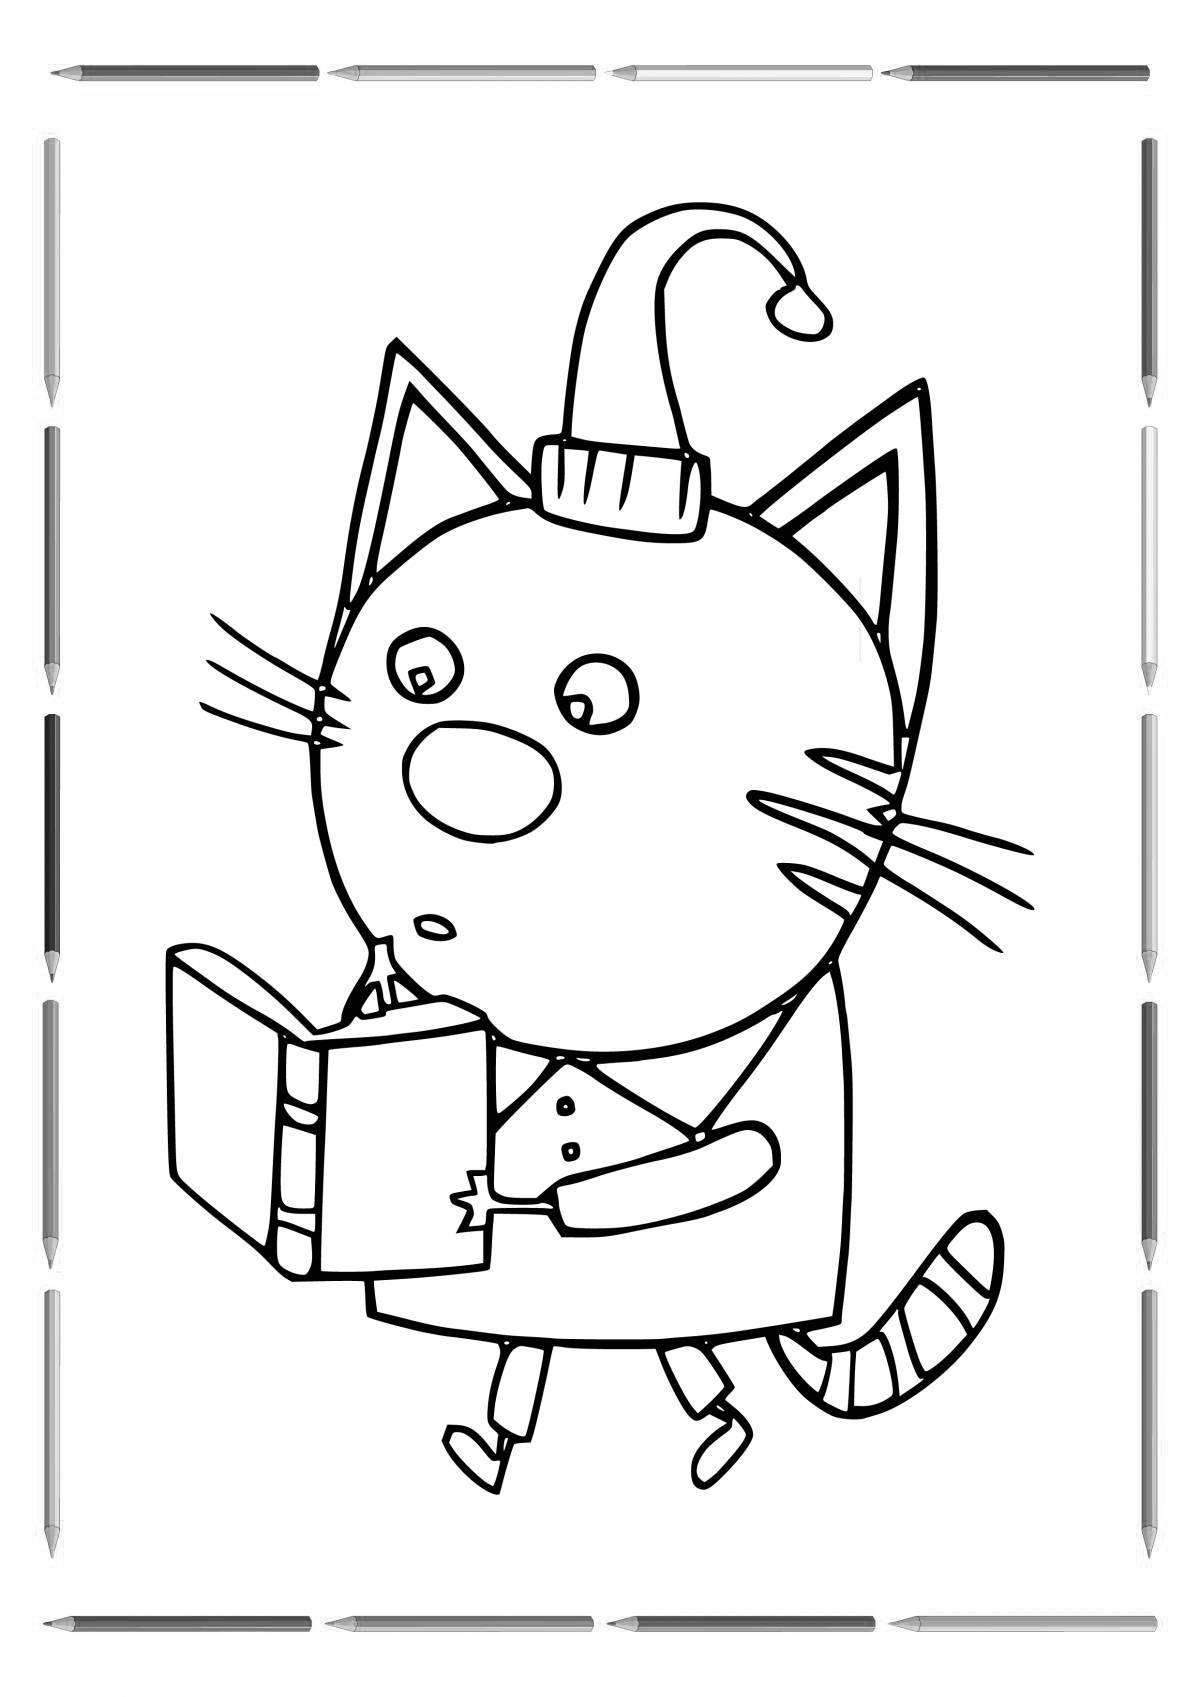 Fancy coloring for girls 3 years old 3 cats